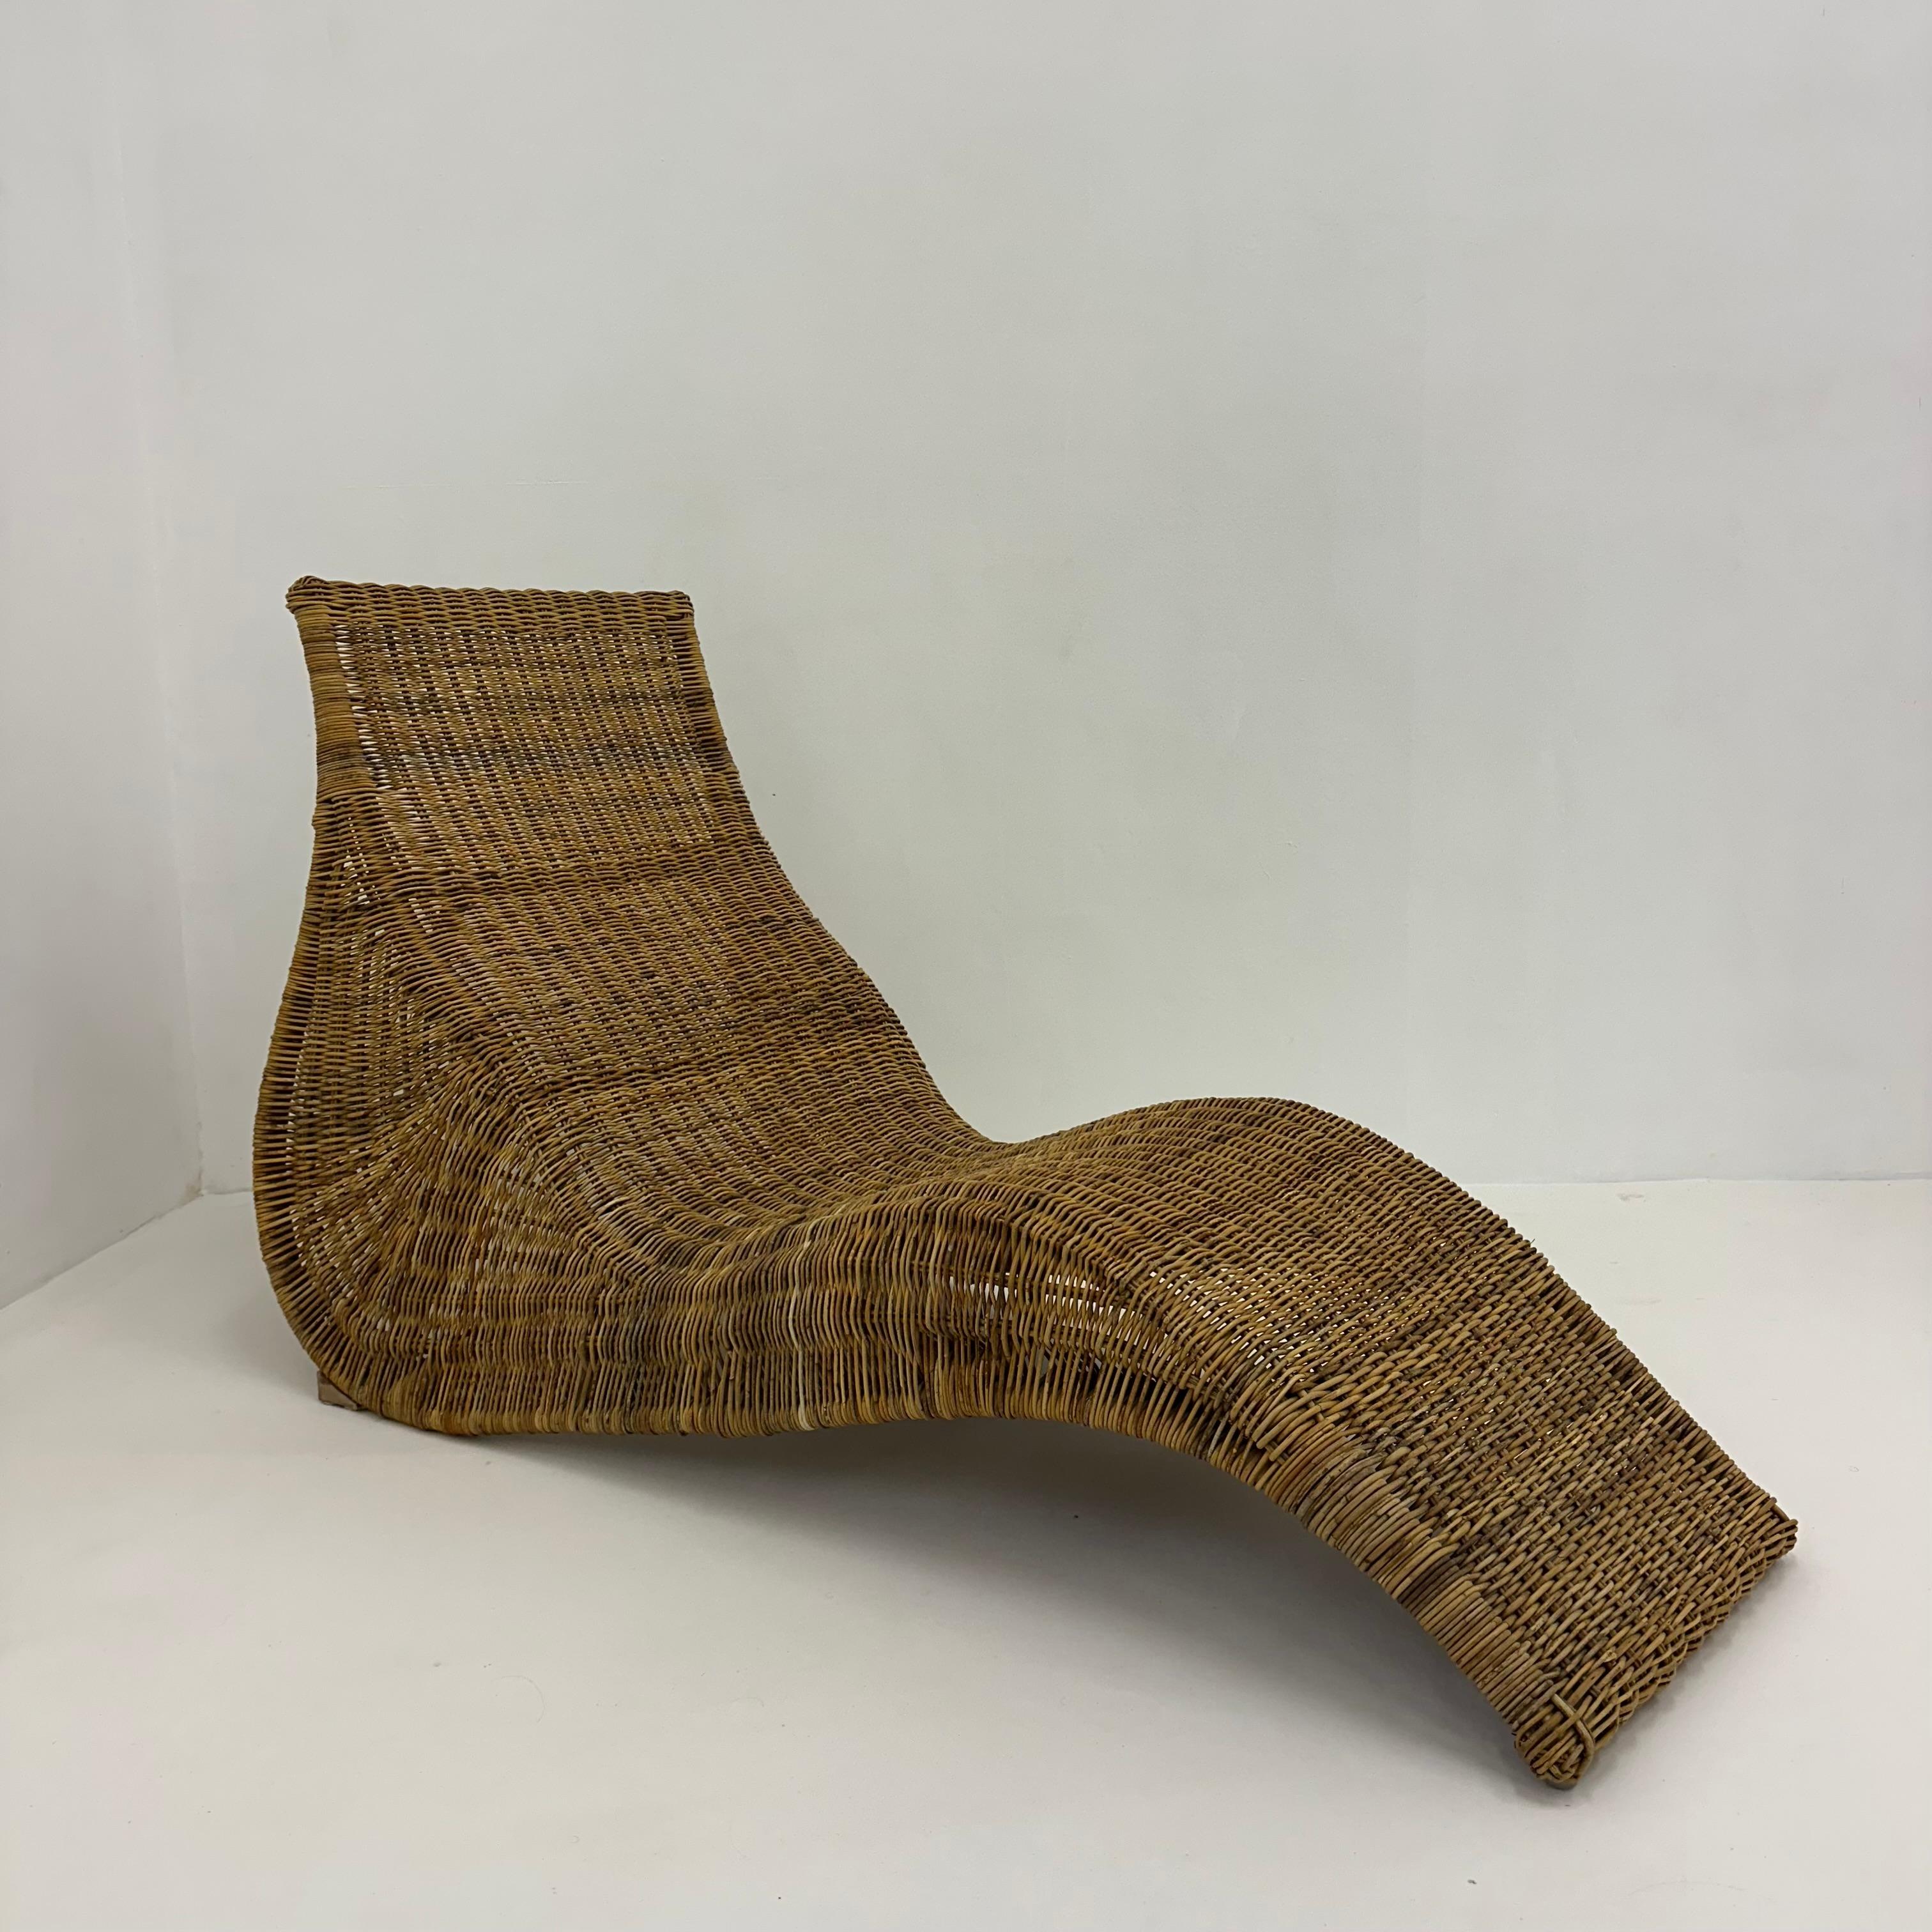 Vintage Karlskrona wicker lounge chair by Karlm Malmvell for Ikea 1998 For Sale 4